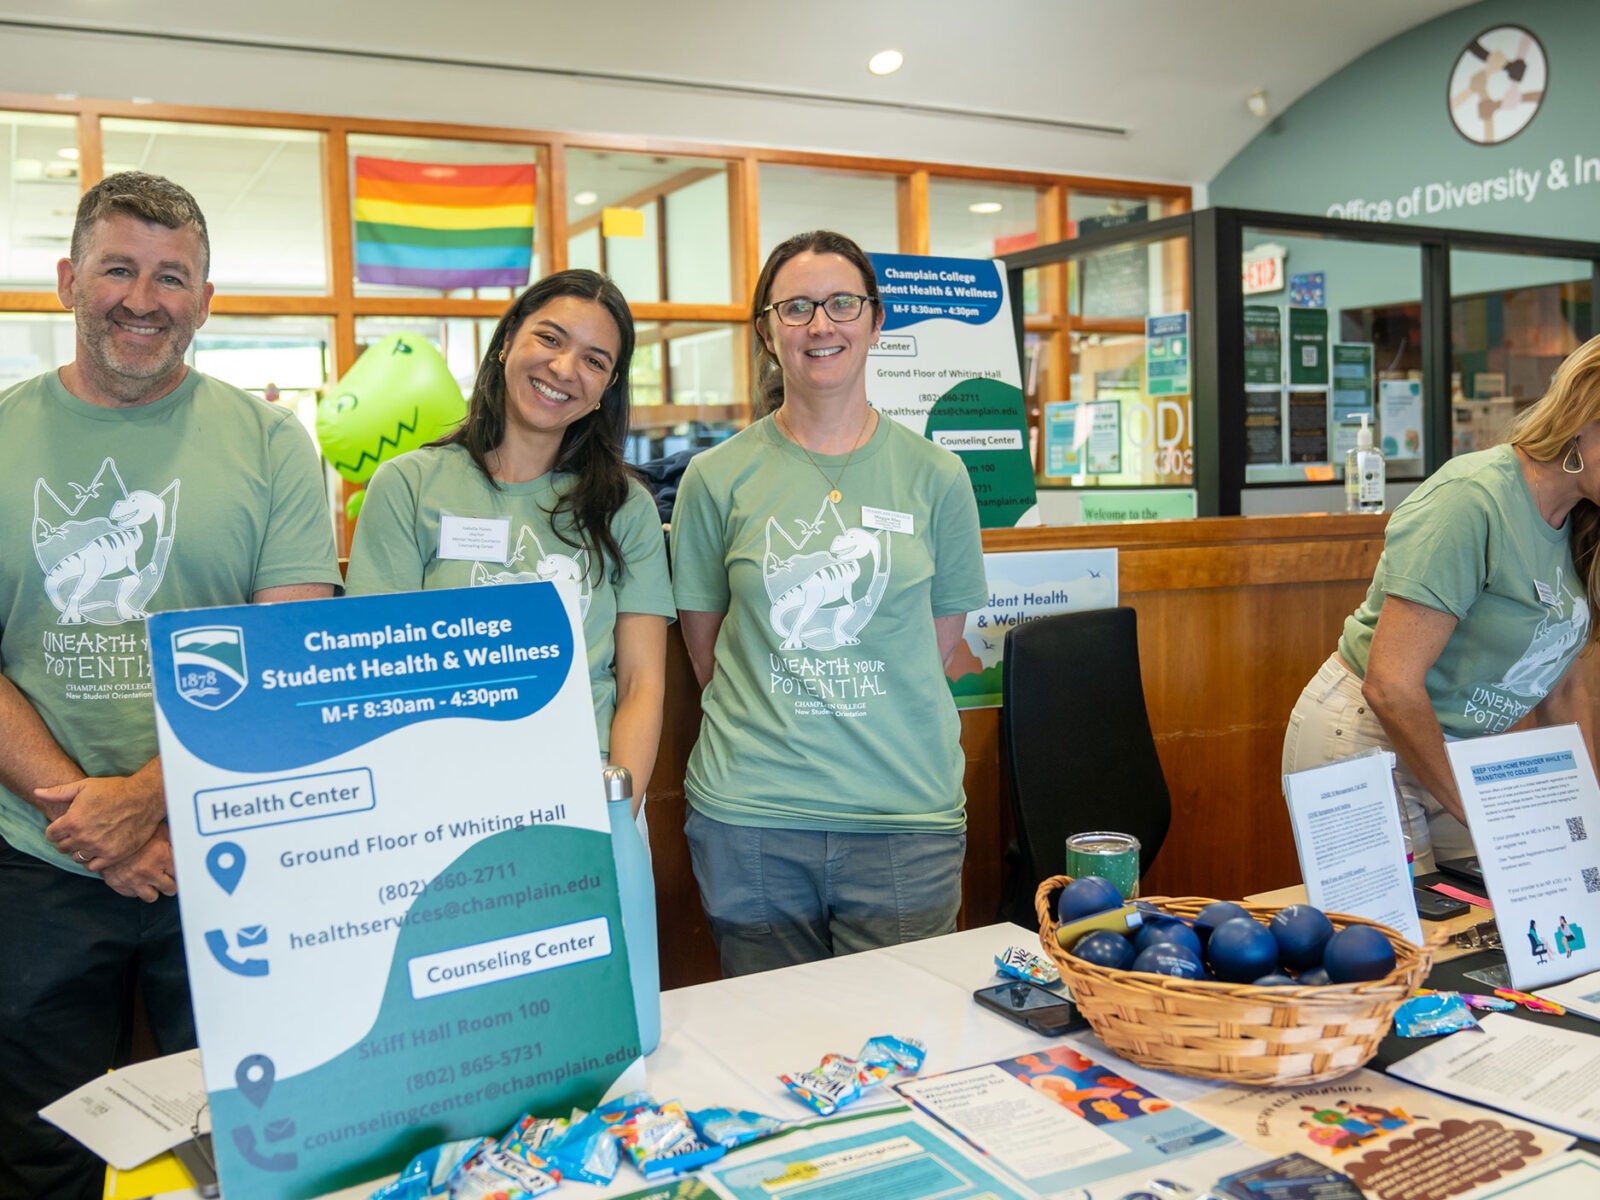 three members of the counseling center team smile in green t-shirts behind a table decked out in informational posters and pamphlets about the services they offer